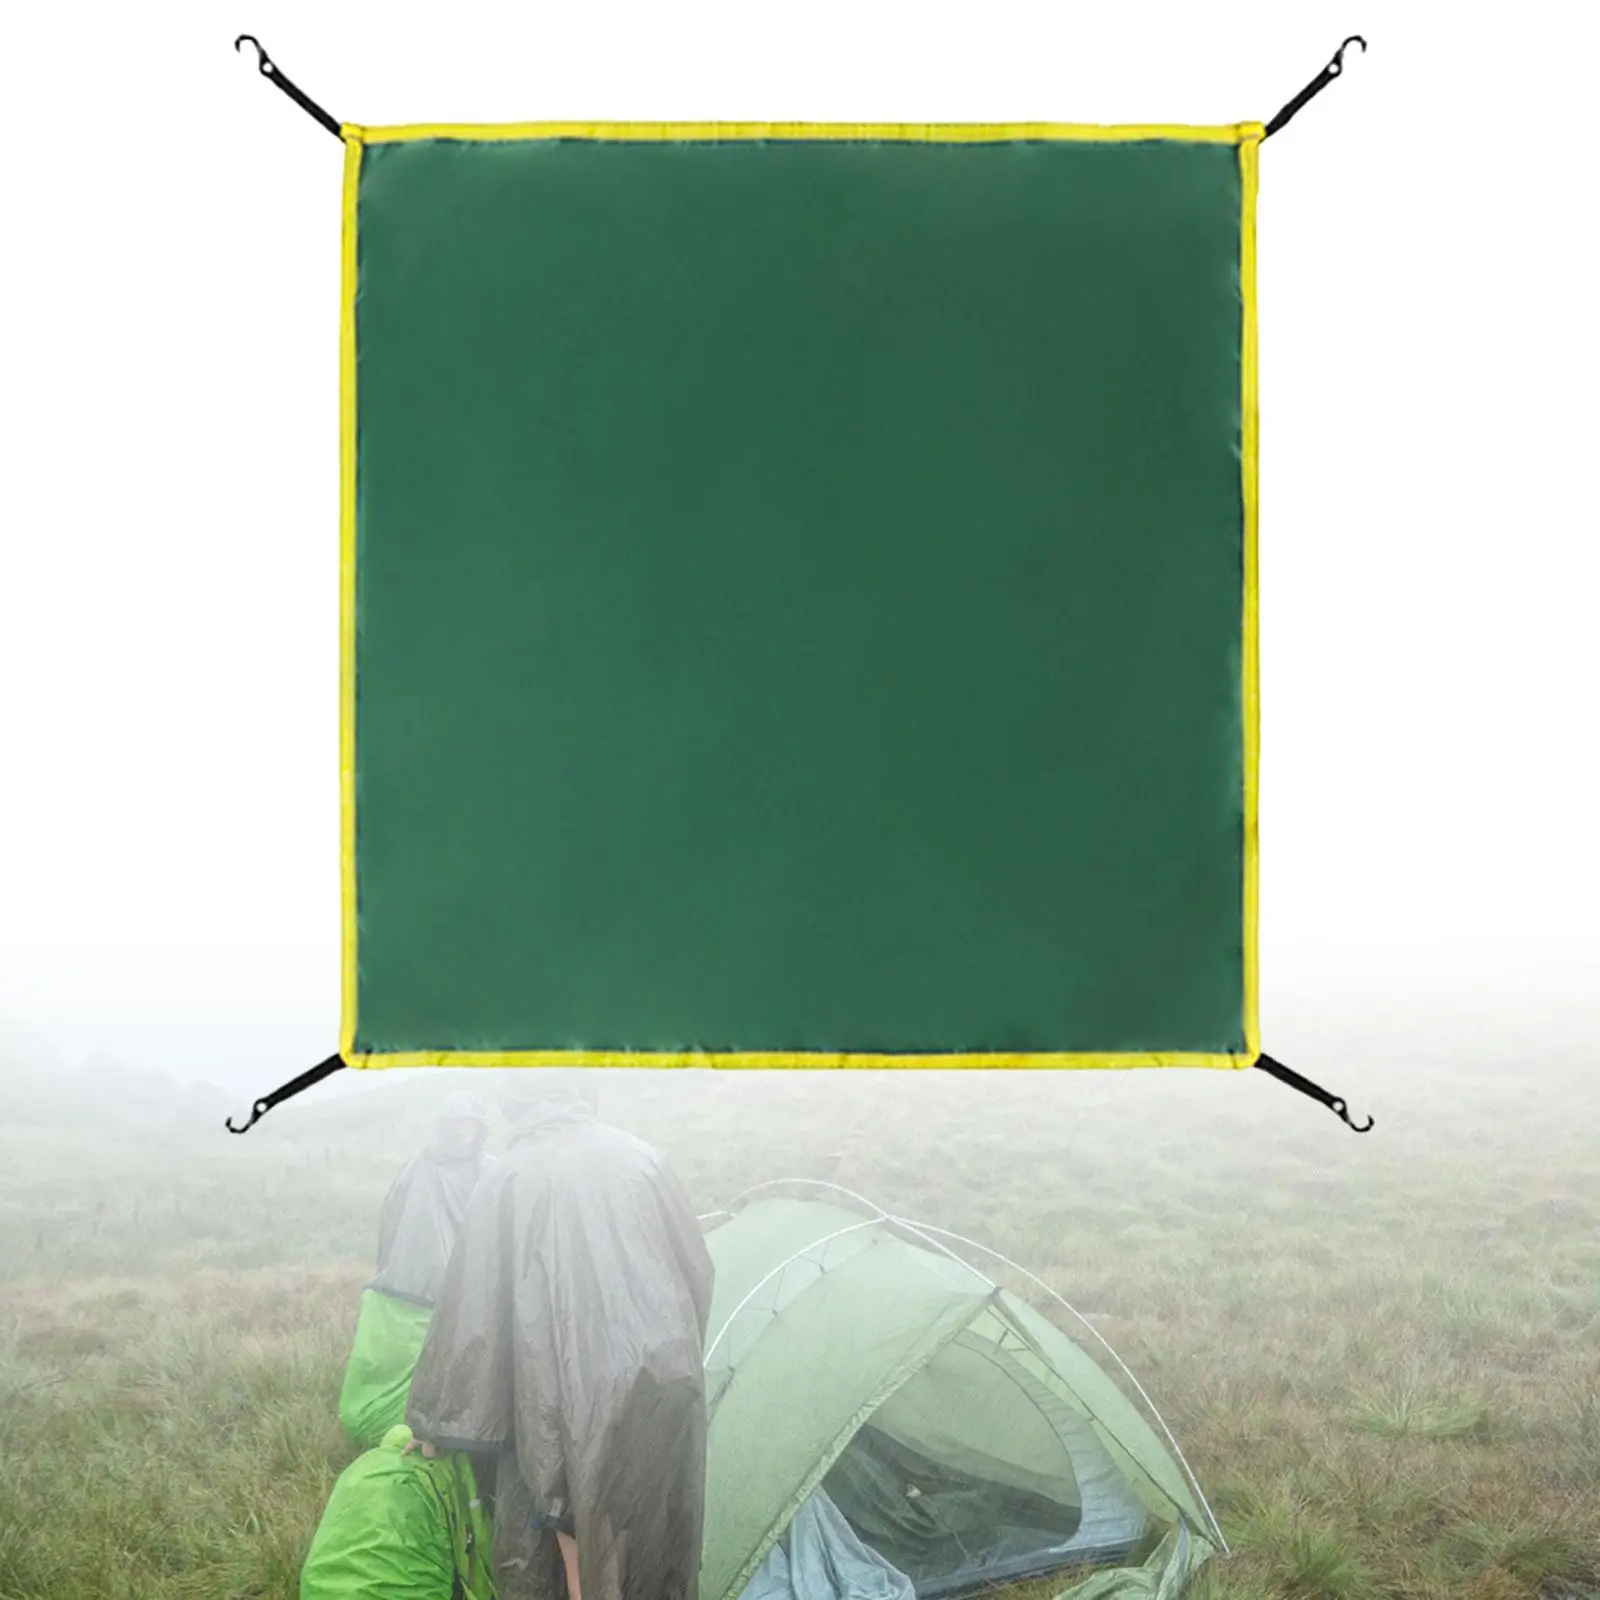 Rainfly Accessory Top Cloth Waterproof Sun Protection 58 inch Tent Tarp Rainproof Top Cover for Camping